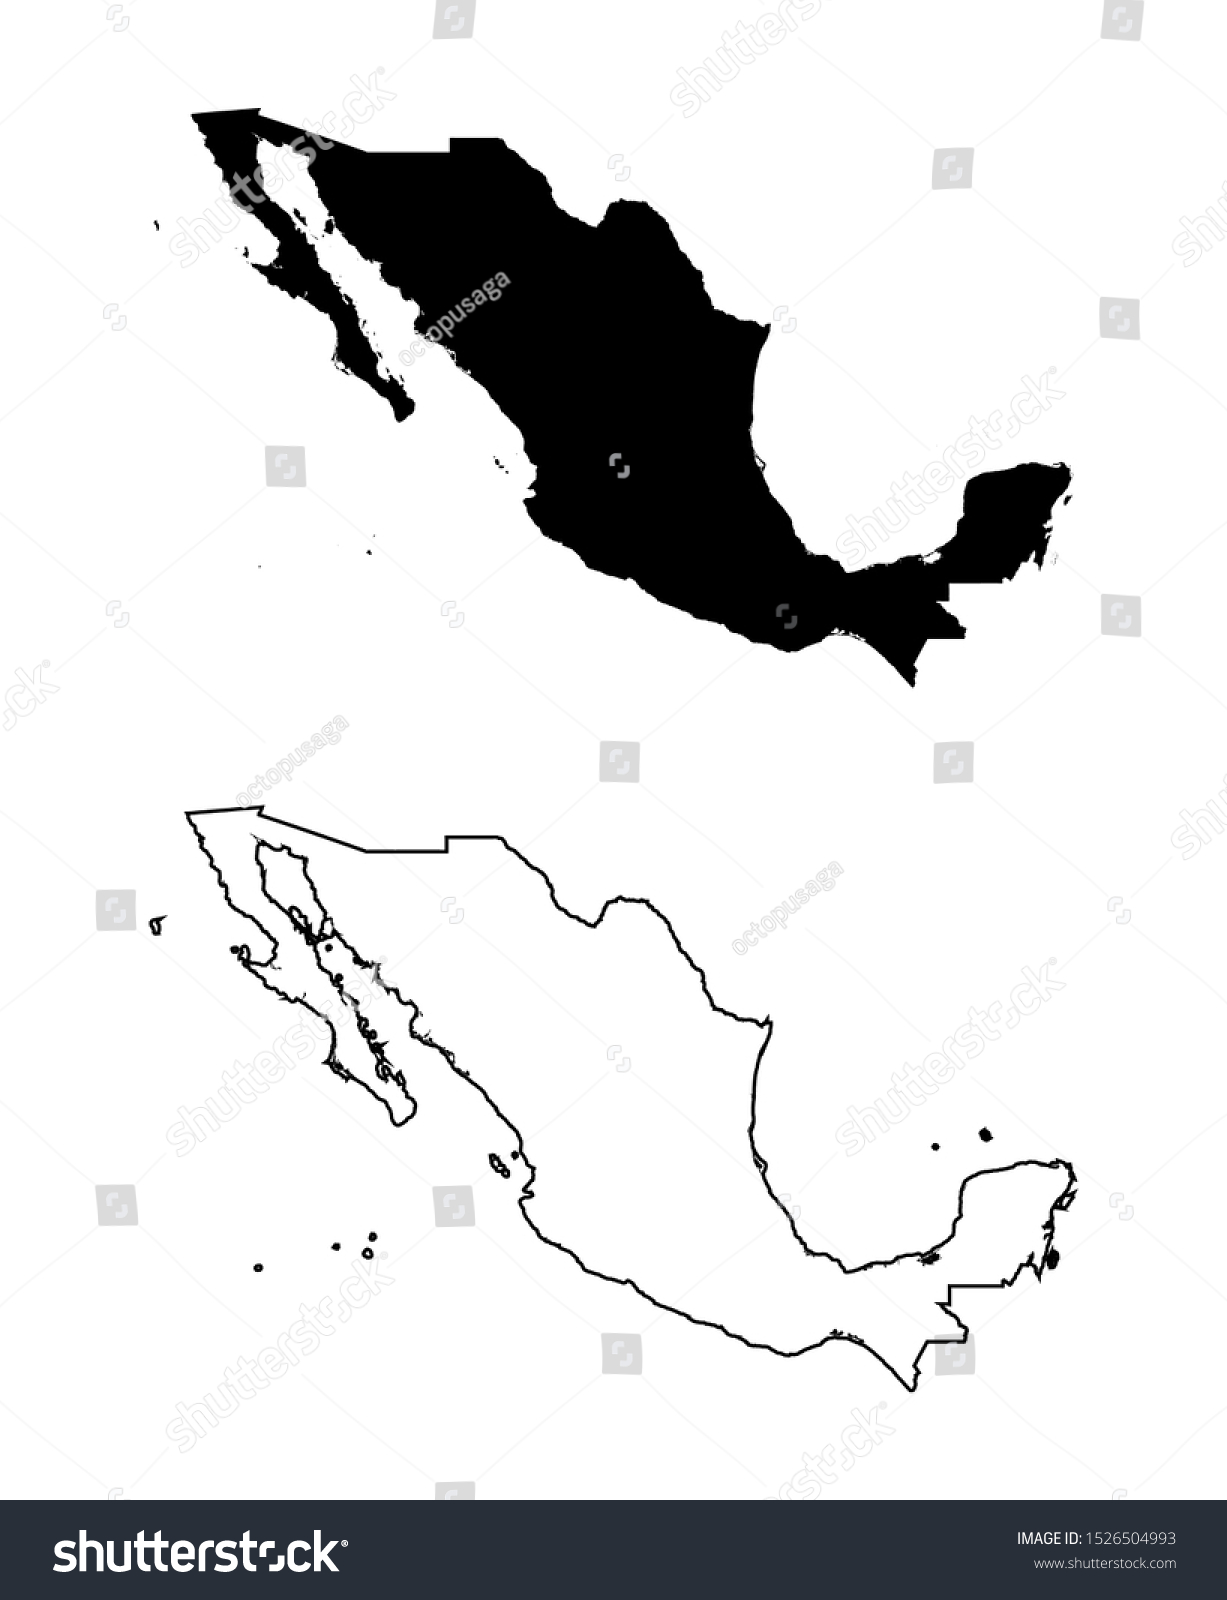 Mexico Blank Map Black Silhouette And Outline Royalty Free Stock Vector 1526504993 2850